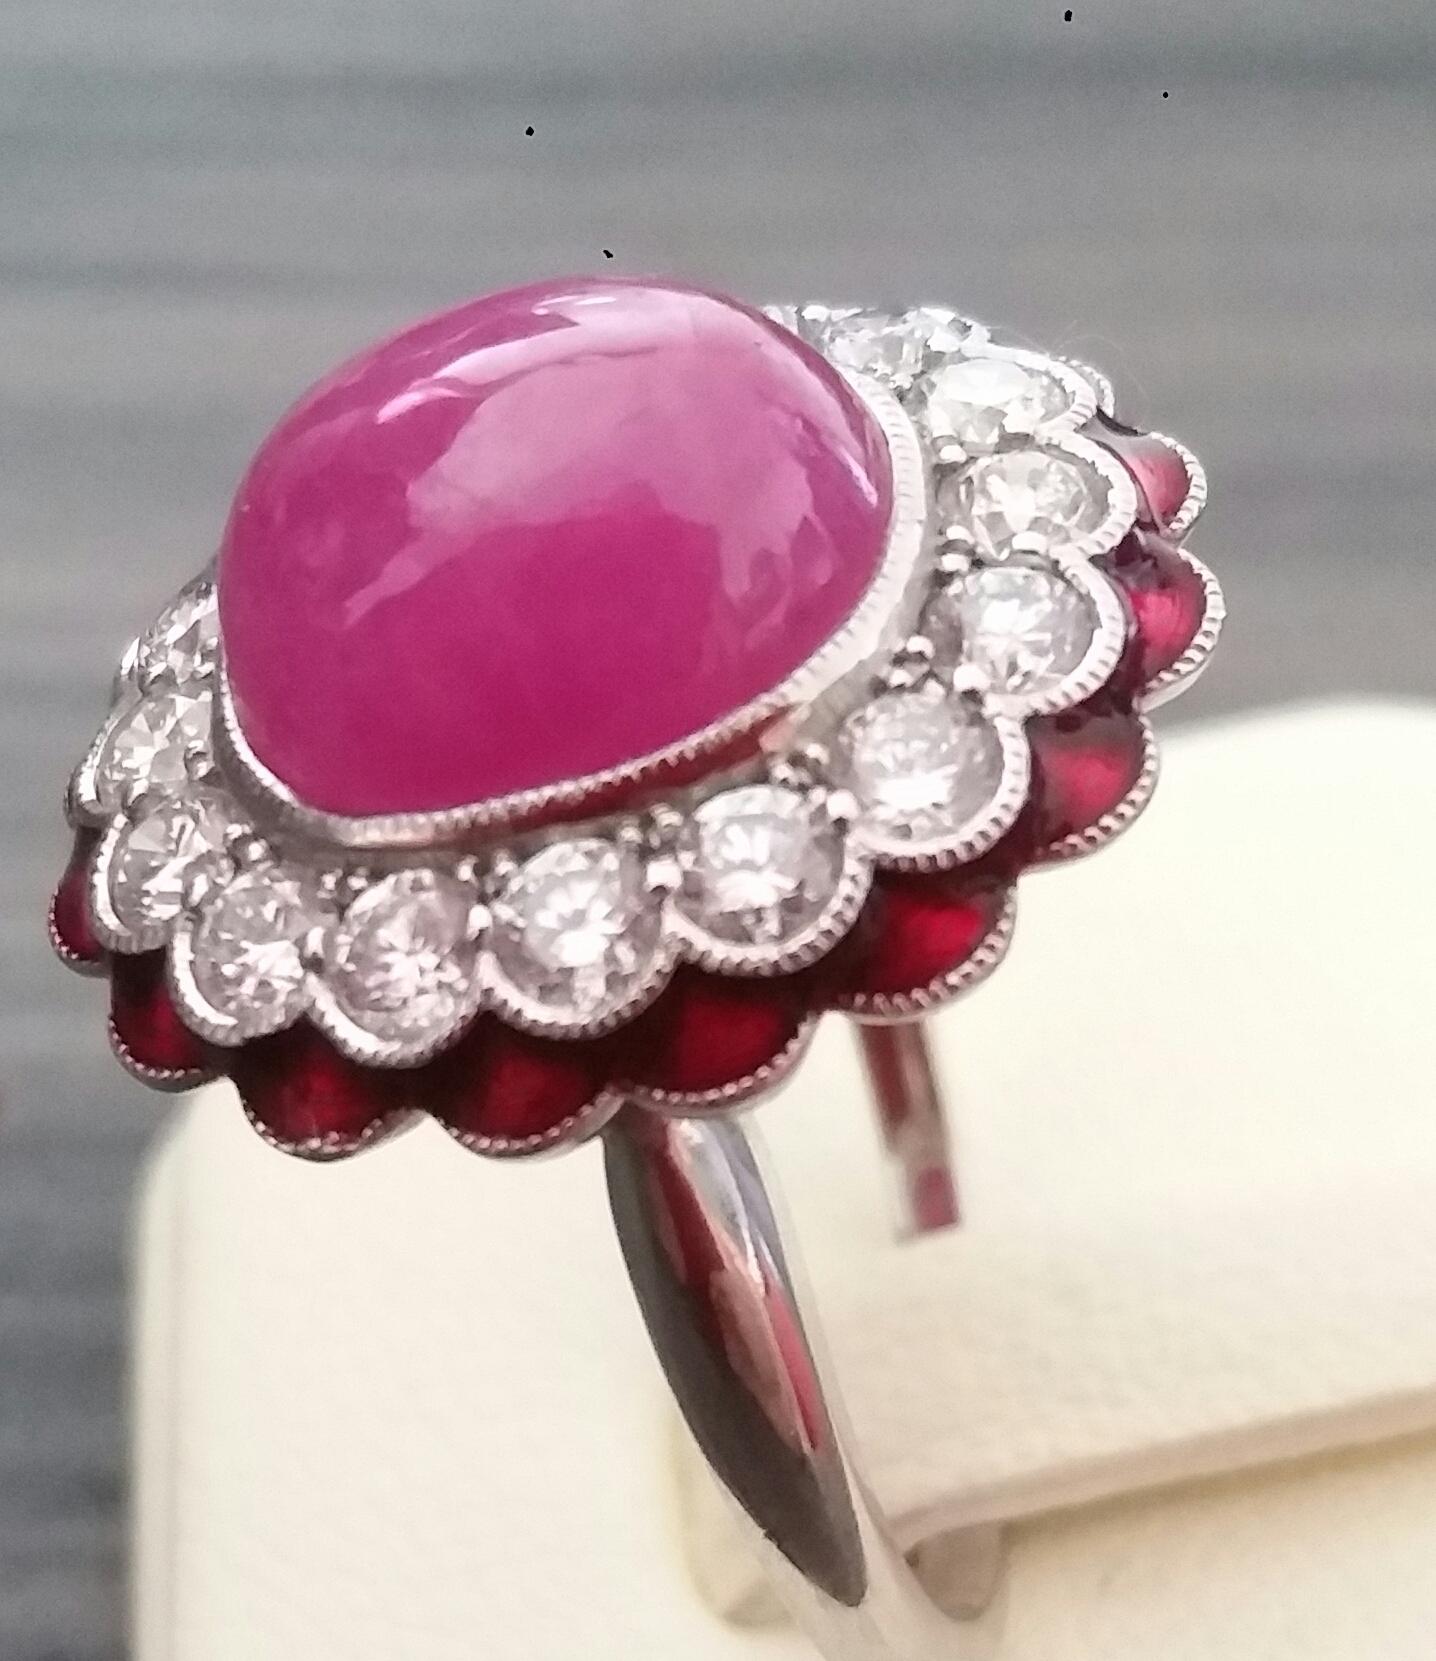 10 Carat Oval Ruby Cab 1 Carat Diamonds Red Enamel 14K White Gold Cocktail Ring For Sale 9